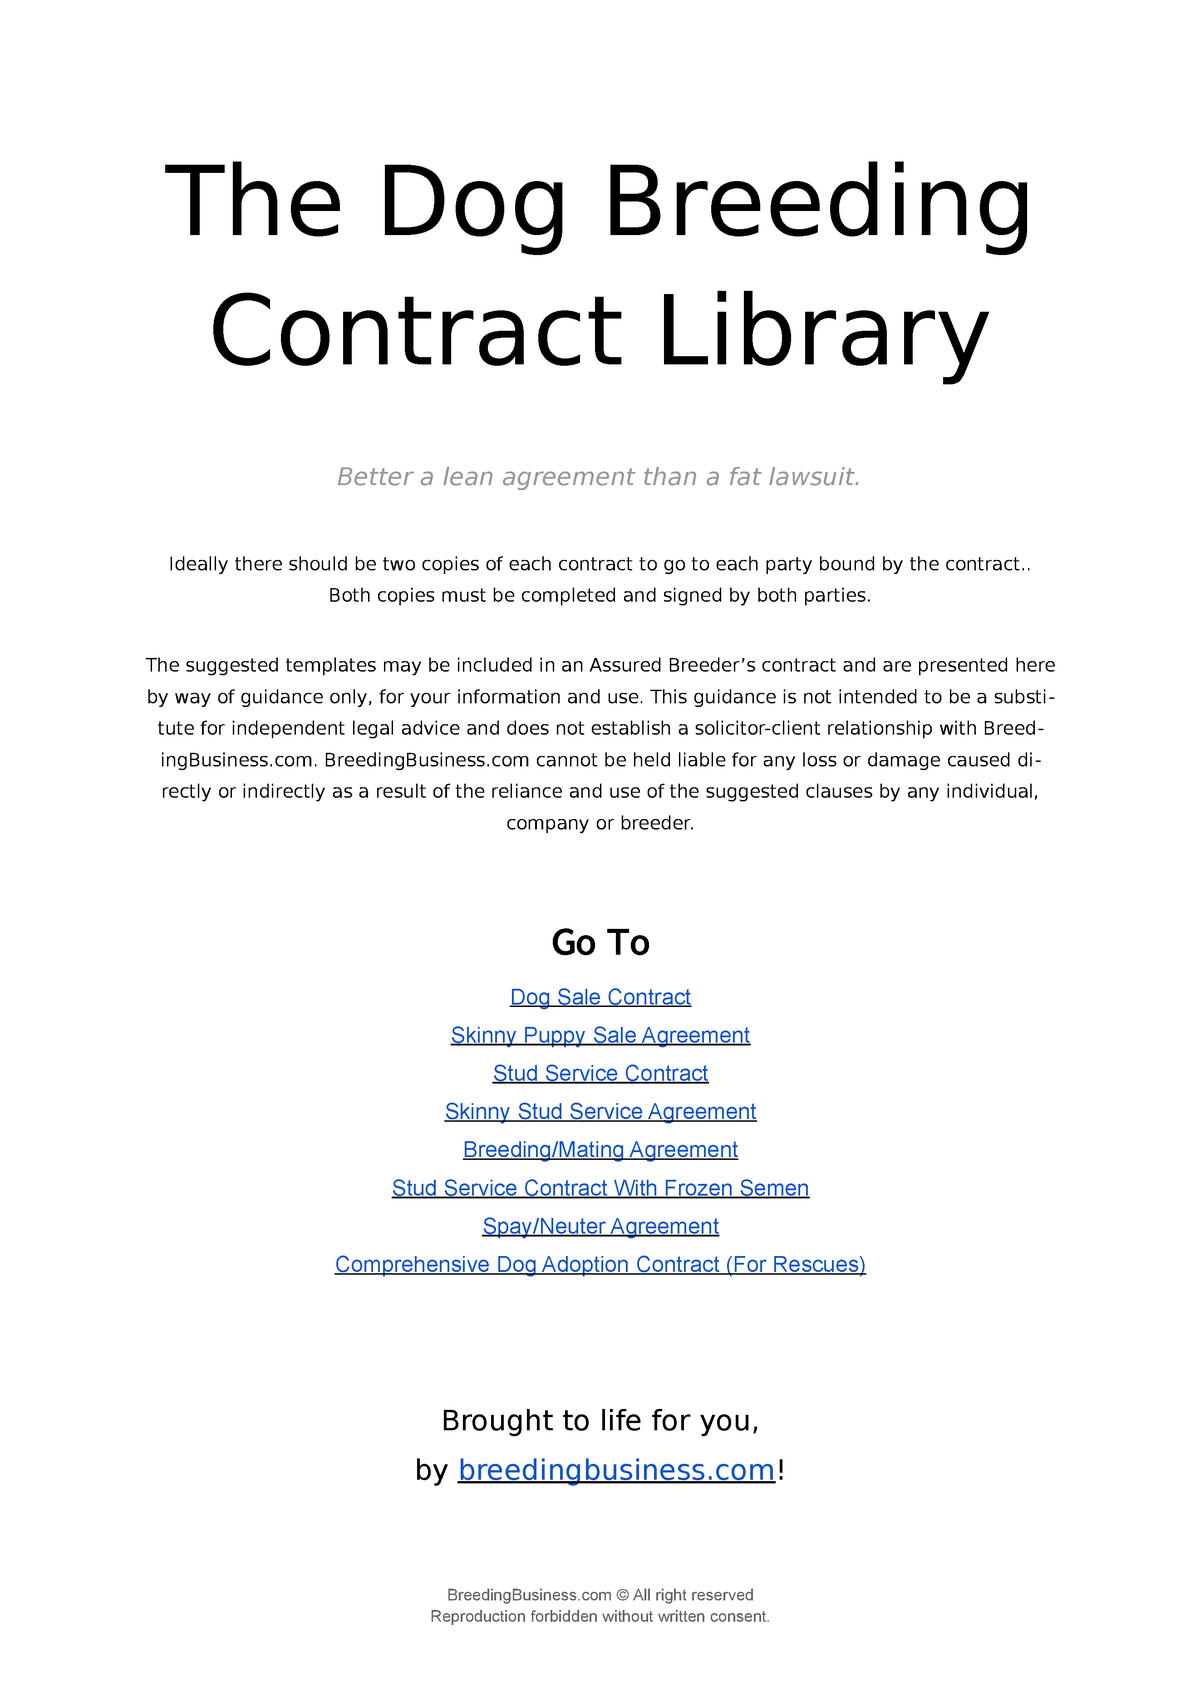 Dog-Breeding-Contract - BUAD 23 - Advanced Business Communication With Dog Breeding Business Plan Template